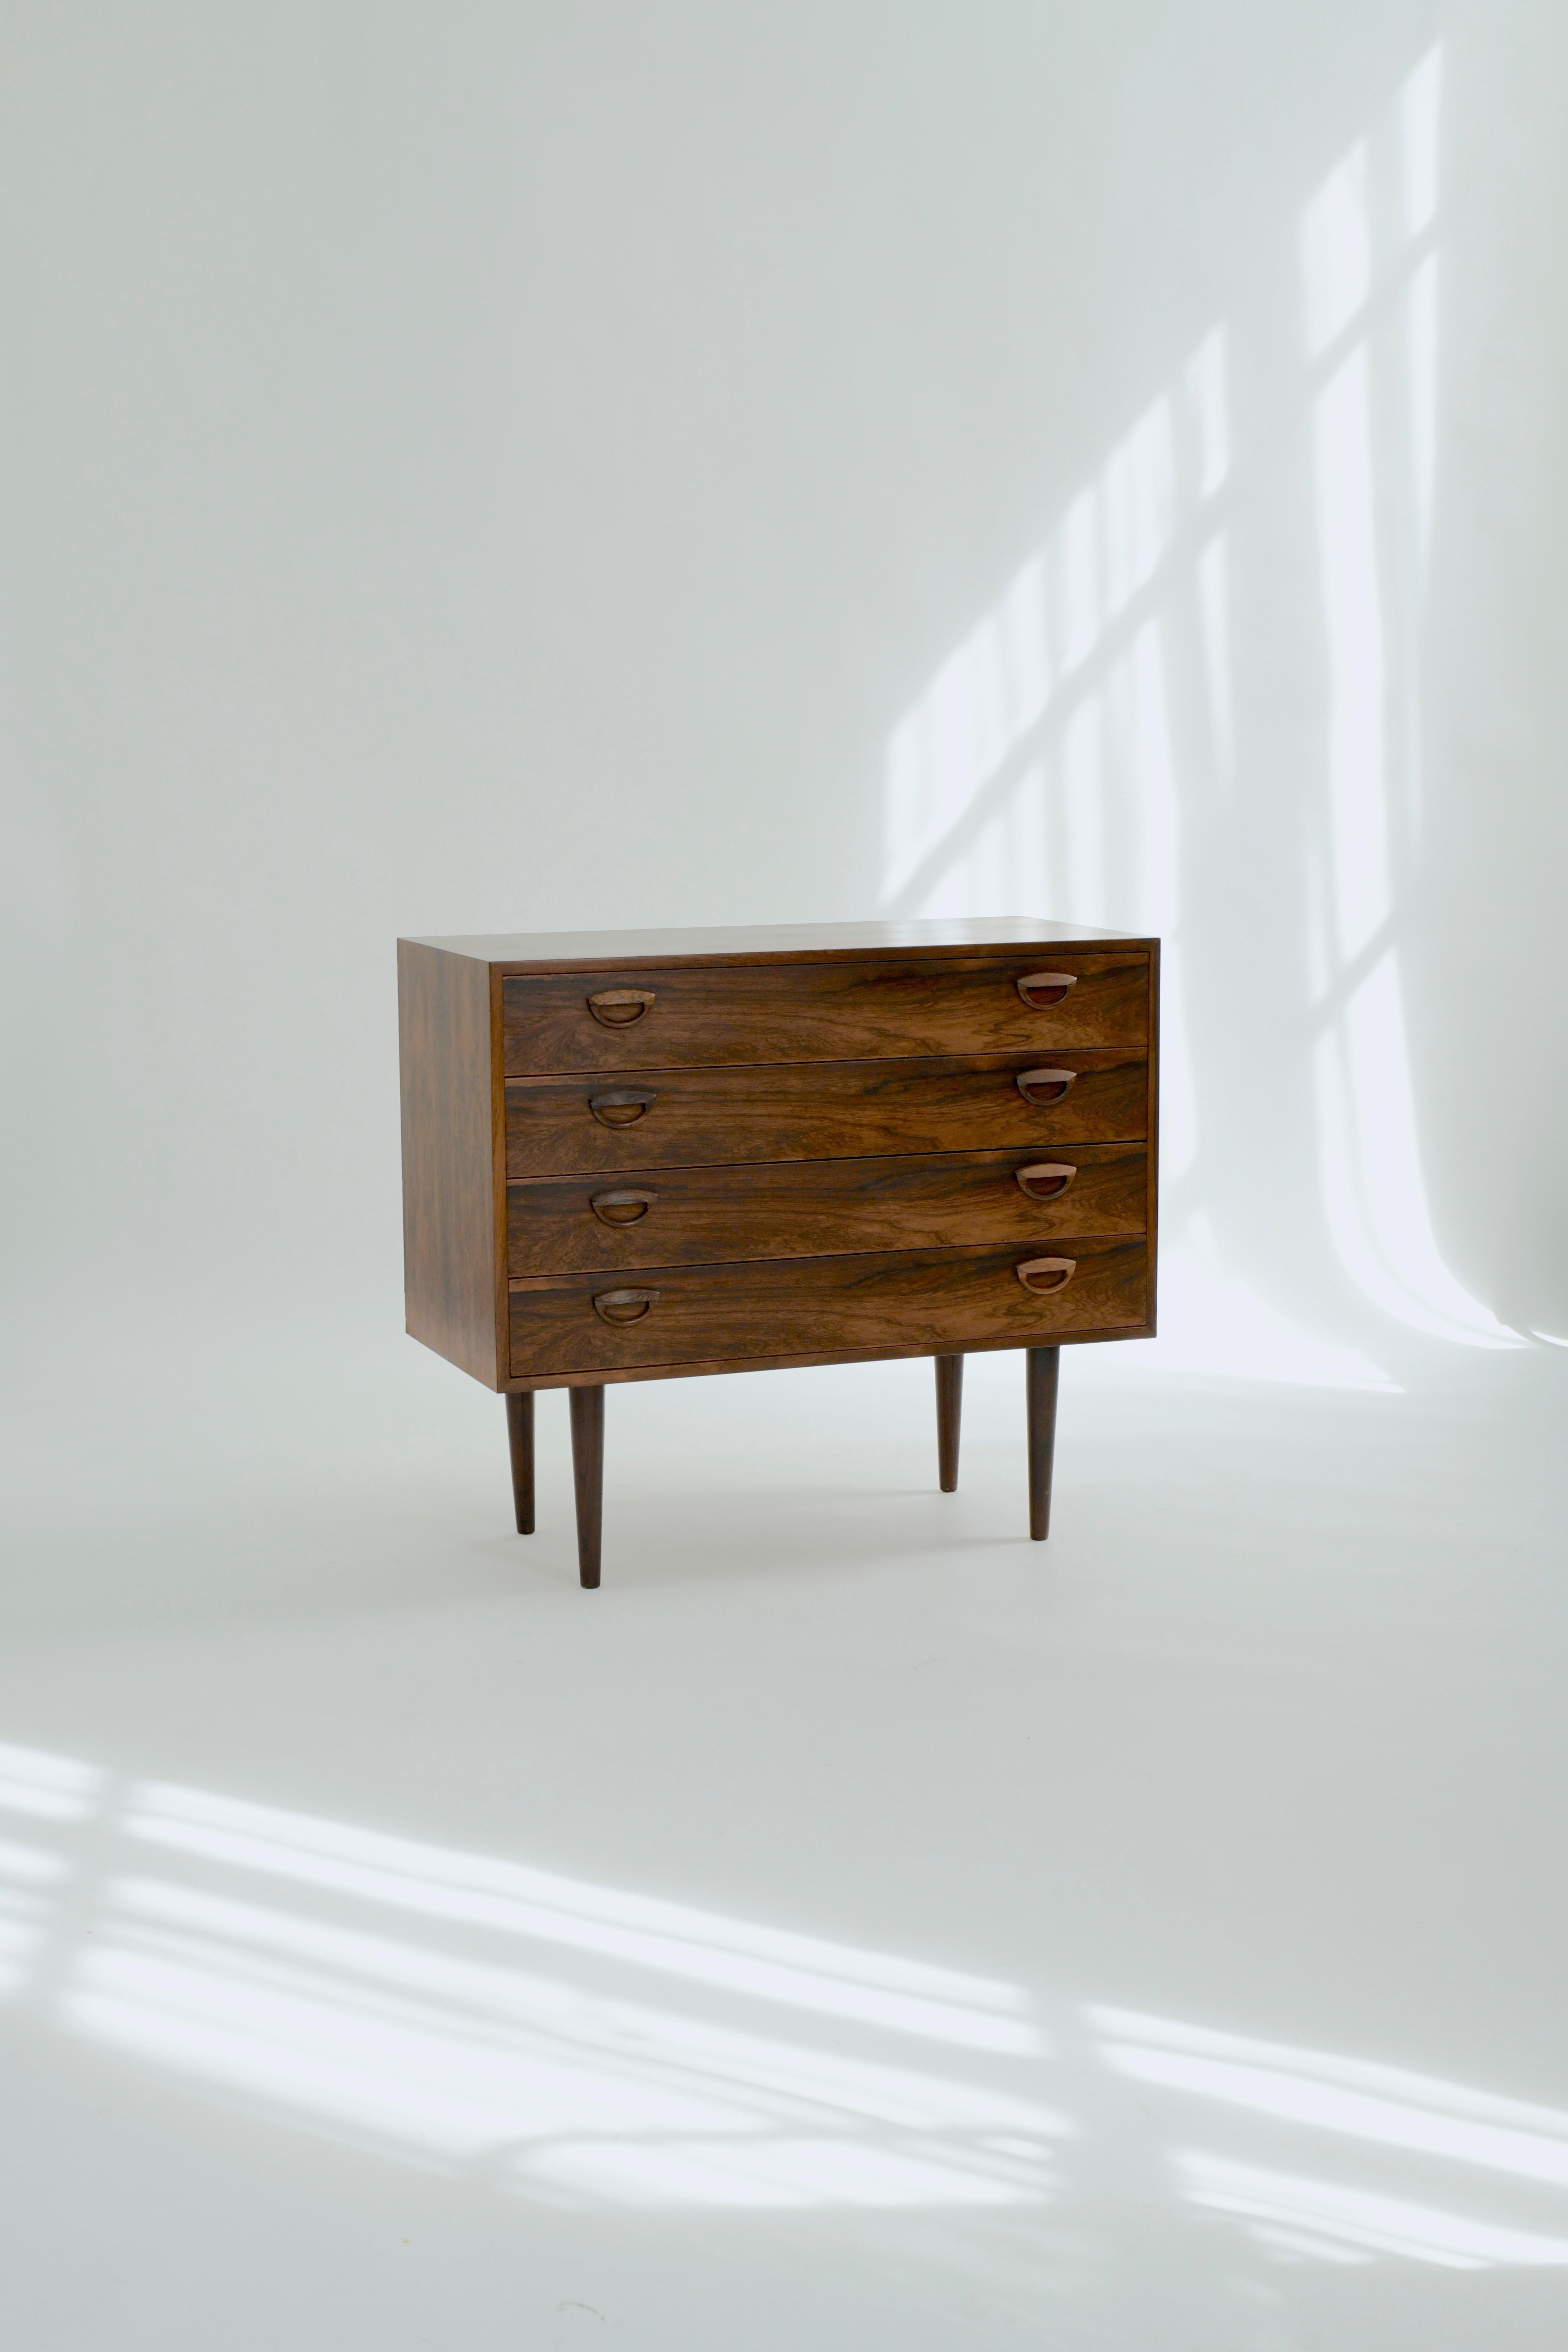 Beautiful 1960s four drawer chest in rosewood by Kai Kristiansen for Fm Møbler, Denmark. 

This chest is in good vintage condition with only some very minor wear to the top in the form of faint rings and small superficial scratches. Overall it